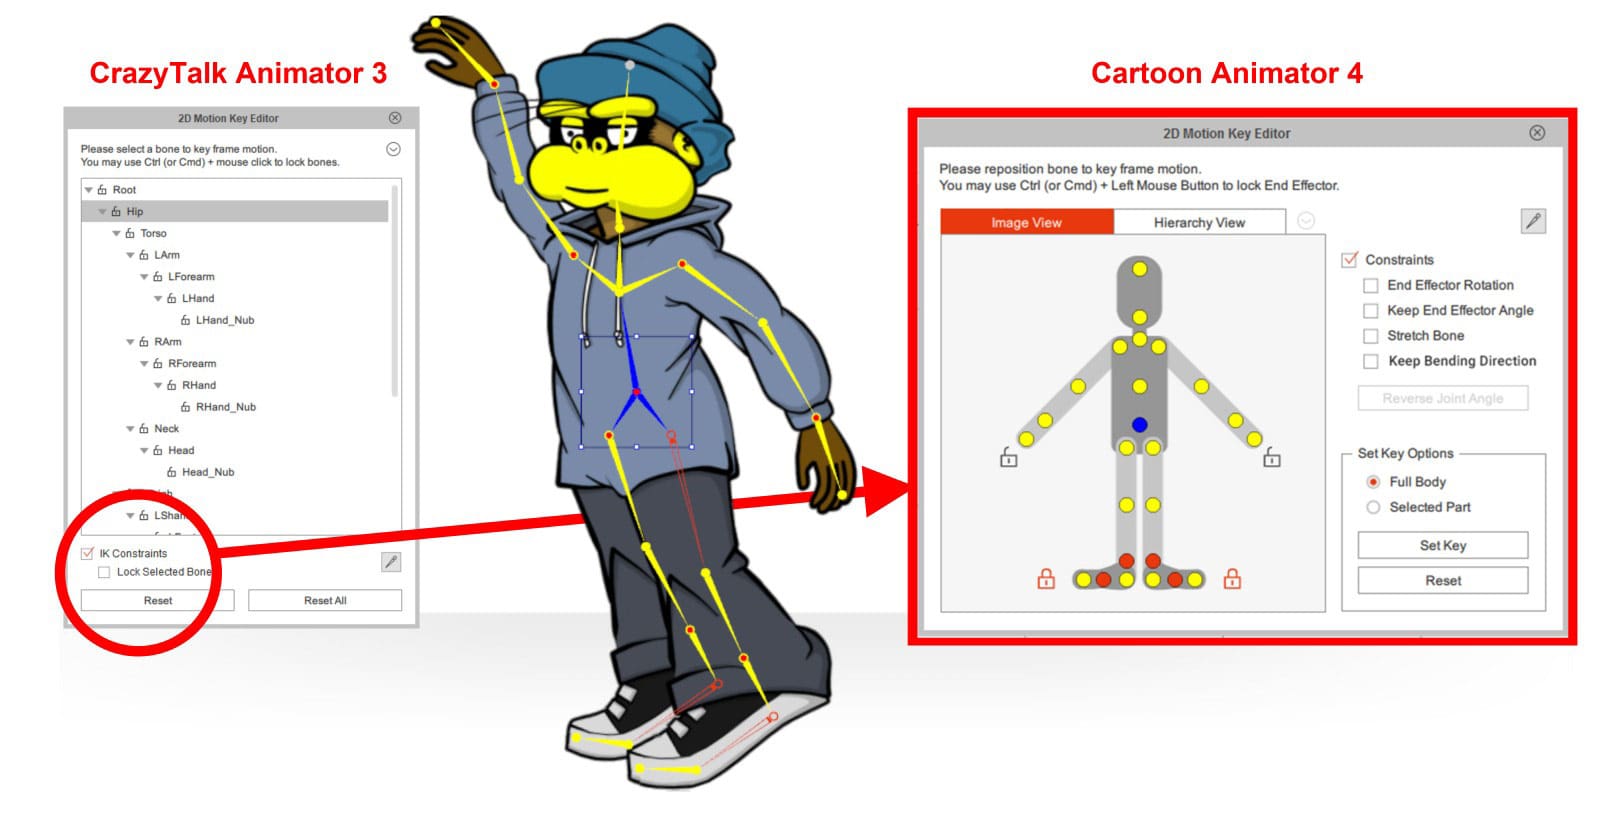 CrazyTalk Animator 3's IK constraints checkbox is expanded with more options in Cartoon Animator 4.